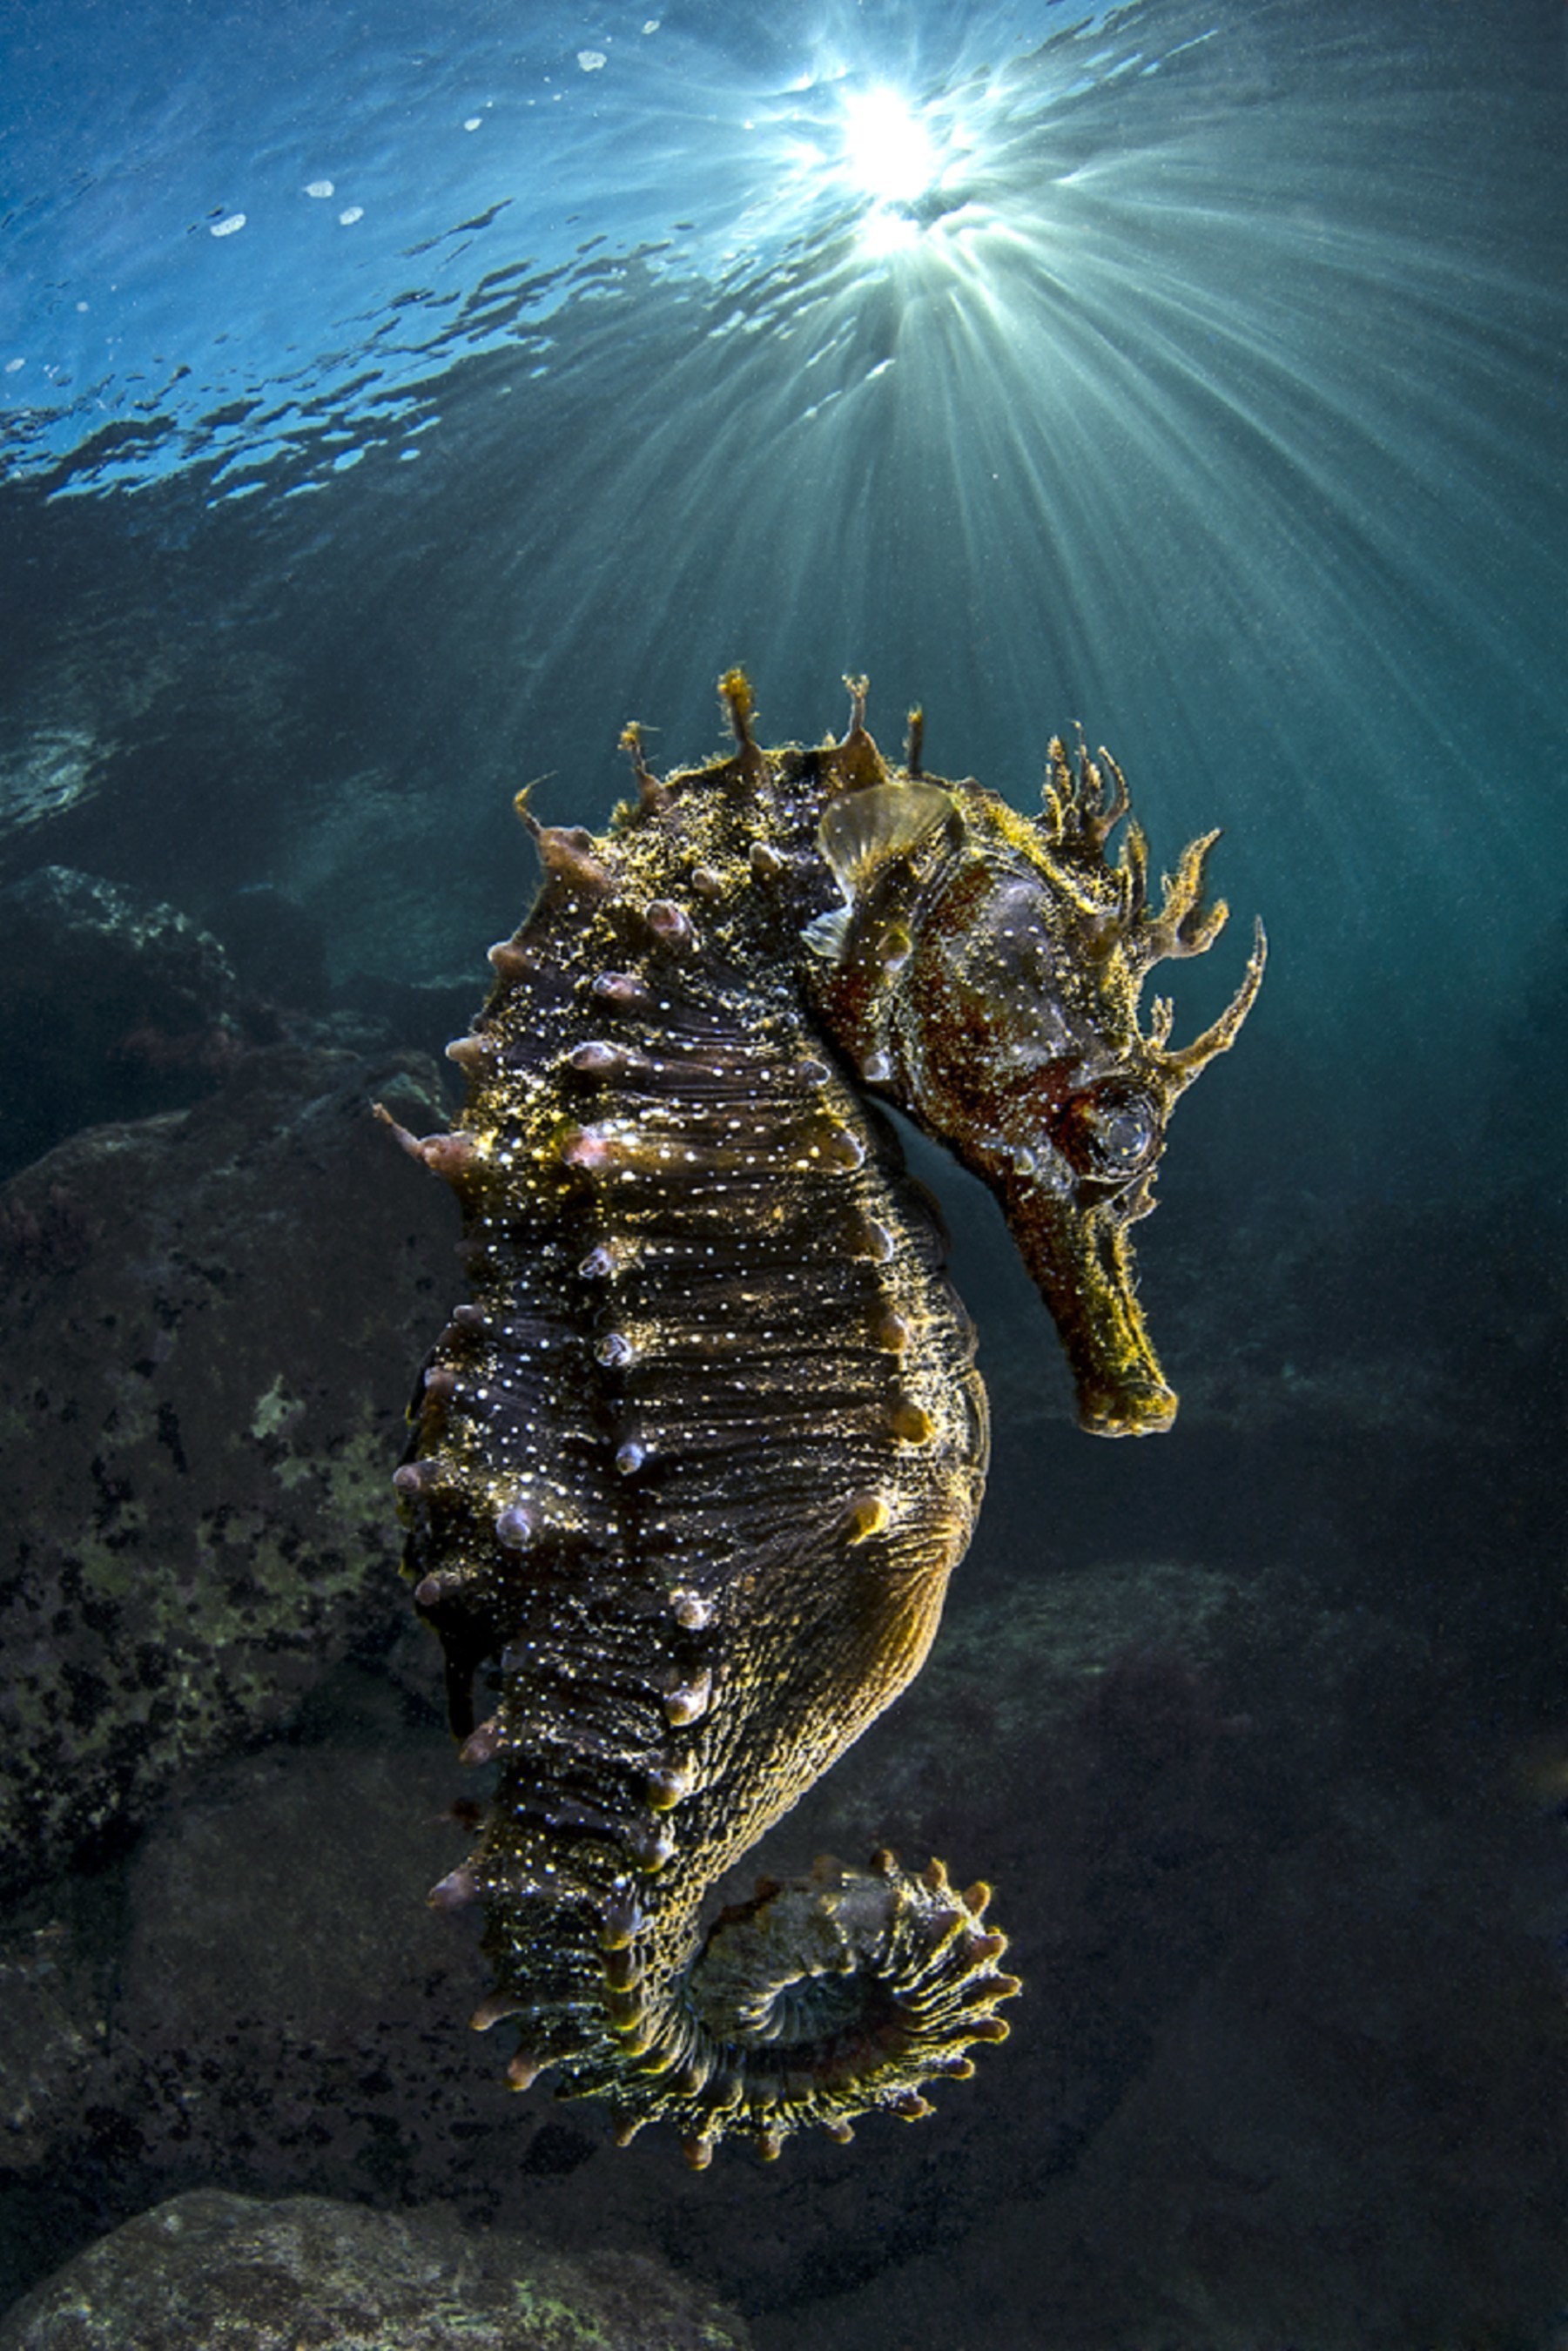 "Diving at a depth of about 10 feet (3 m), I was fascinated by the slow movement of this tiny, 2.5-inch-high (7 cm) animal. Using my wide angle lens, I shot with the late afternoon sun shining through the water's surface." @ Domenico Roscigno / NBP Awards